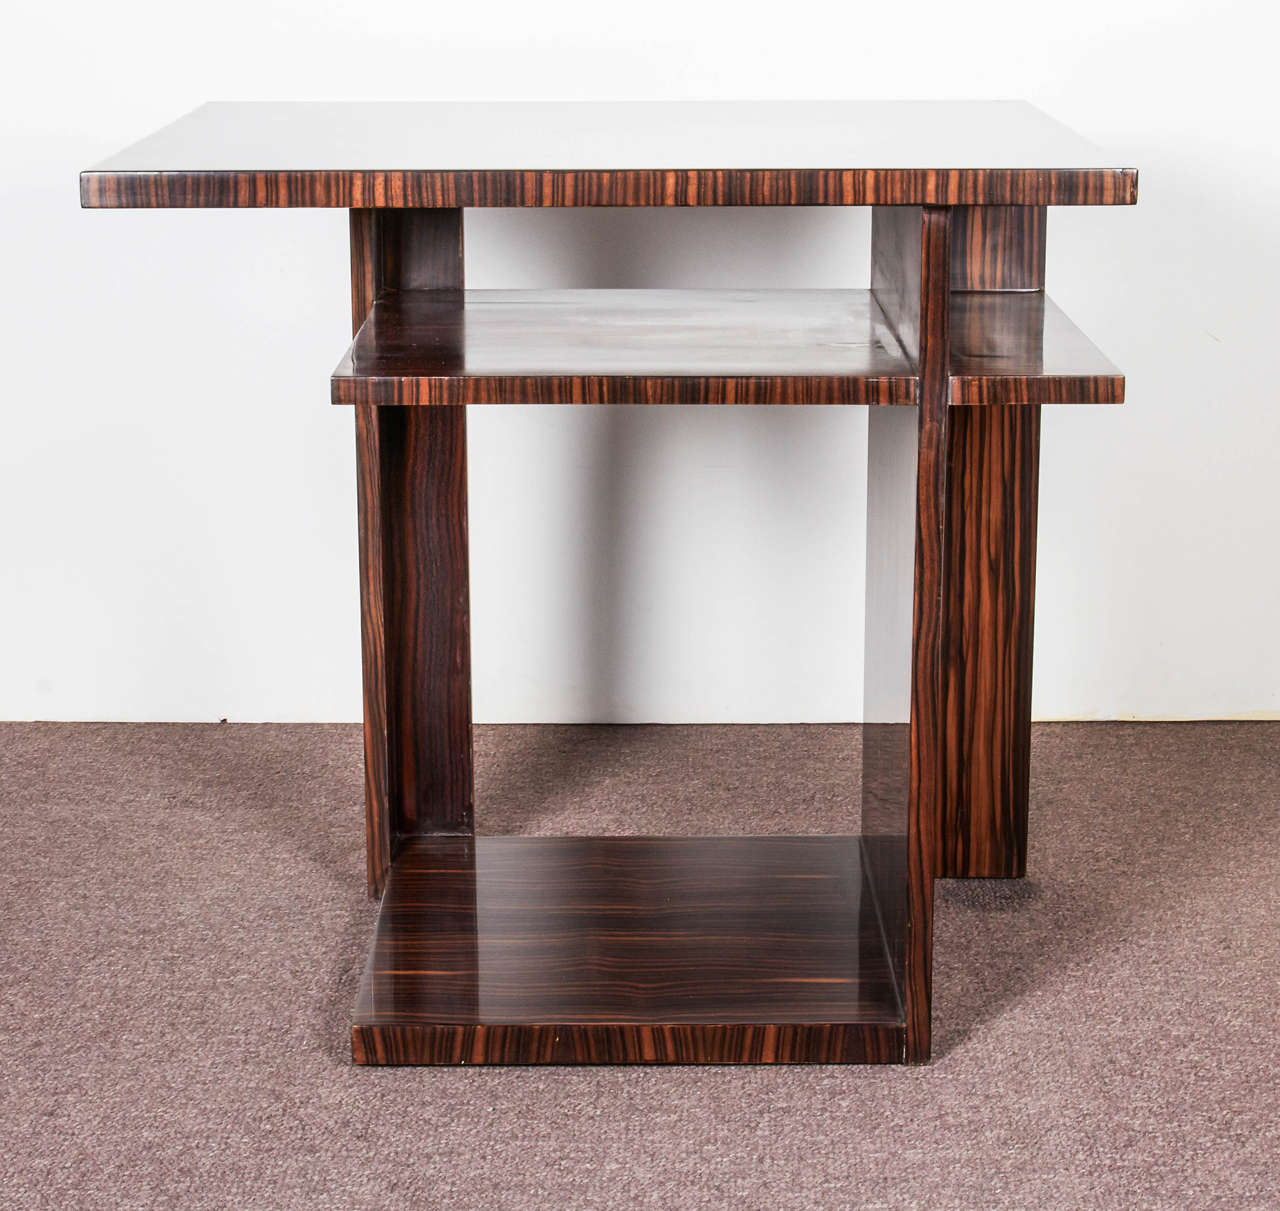 French Art Deco highly sculptural and artistic side table featuring varied levels of shelving in a striking display of asymmetrical design. This Minimalist table in exotic Macassar ebony can be used anywhere a dramatic statement is